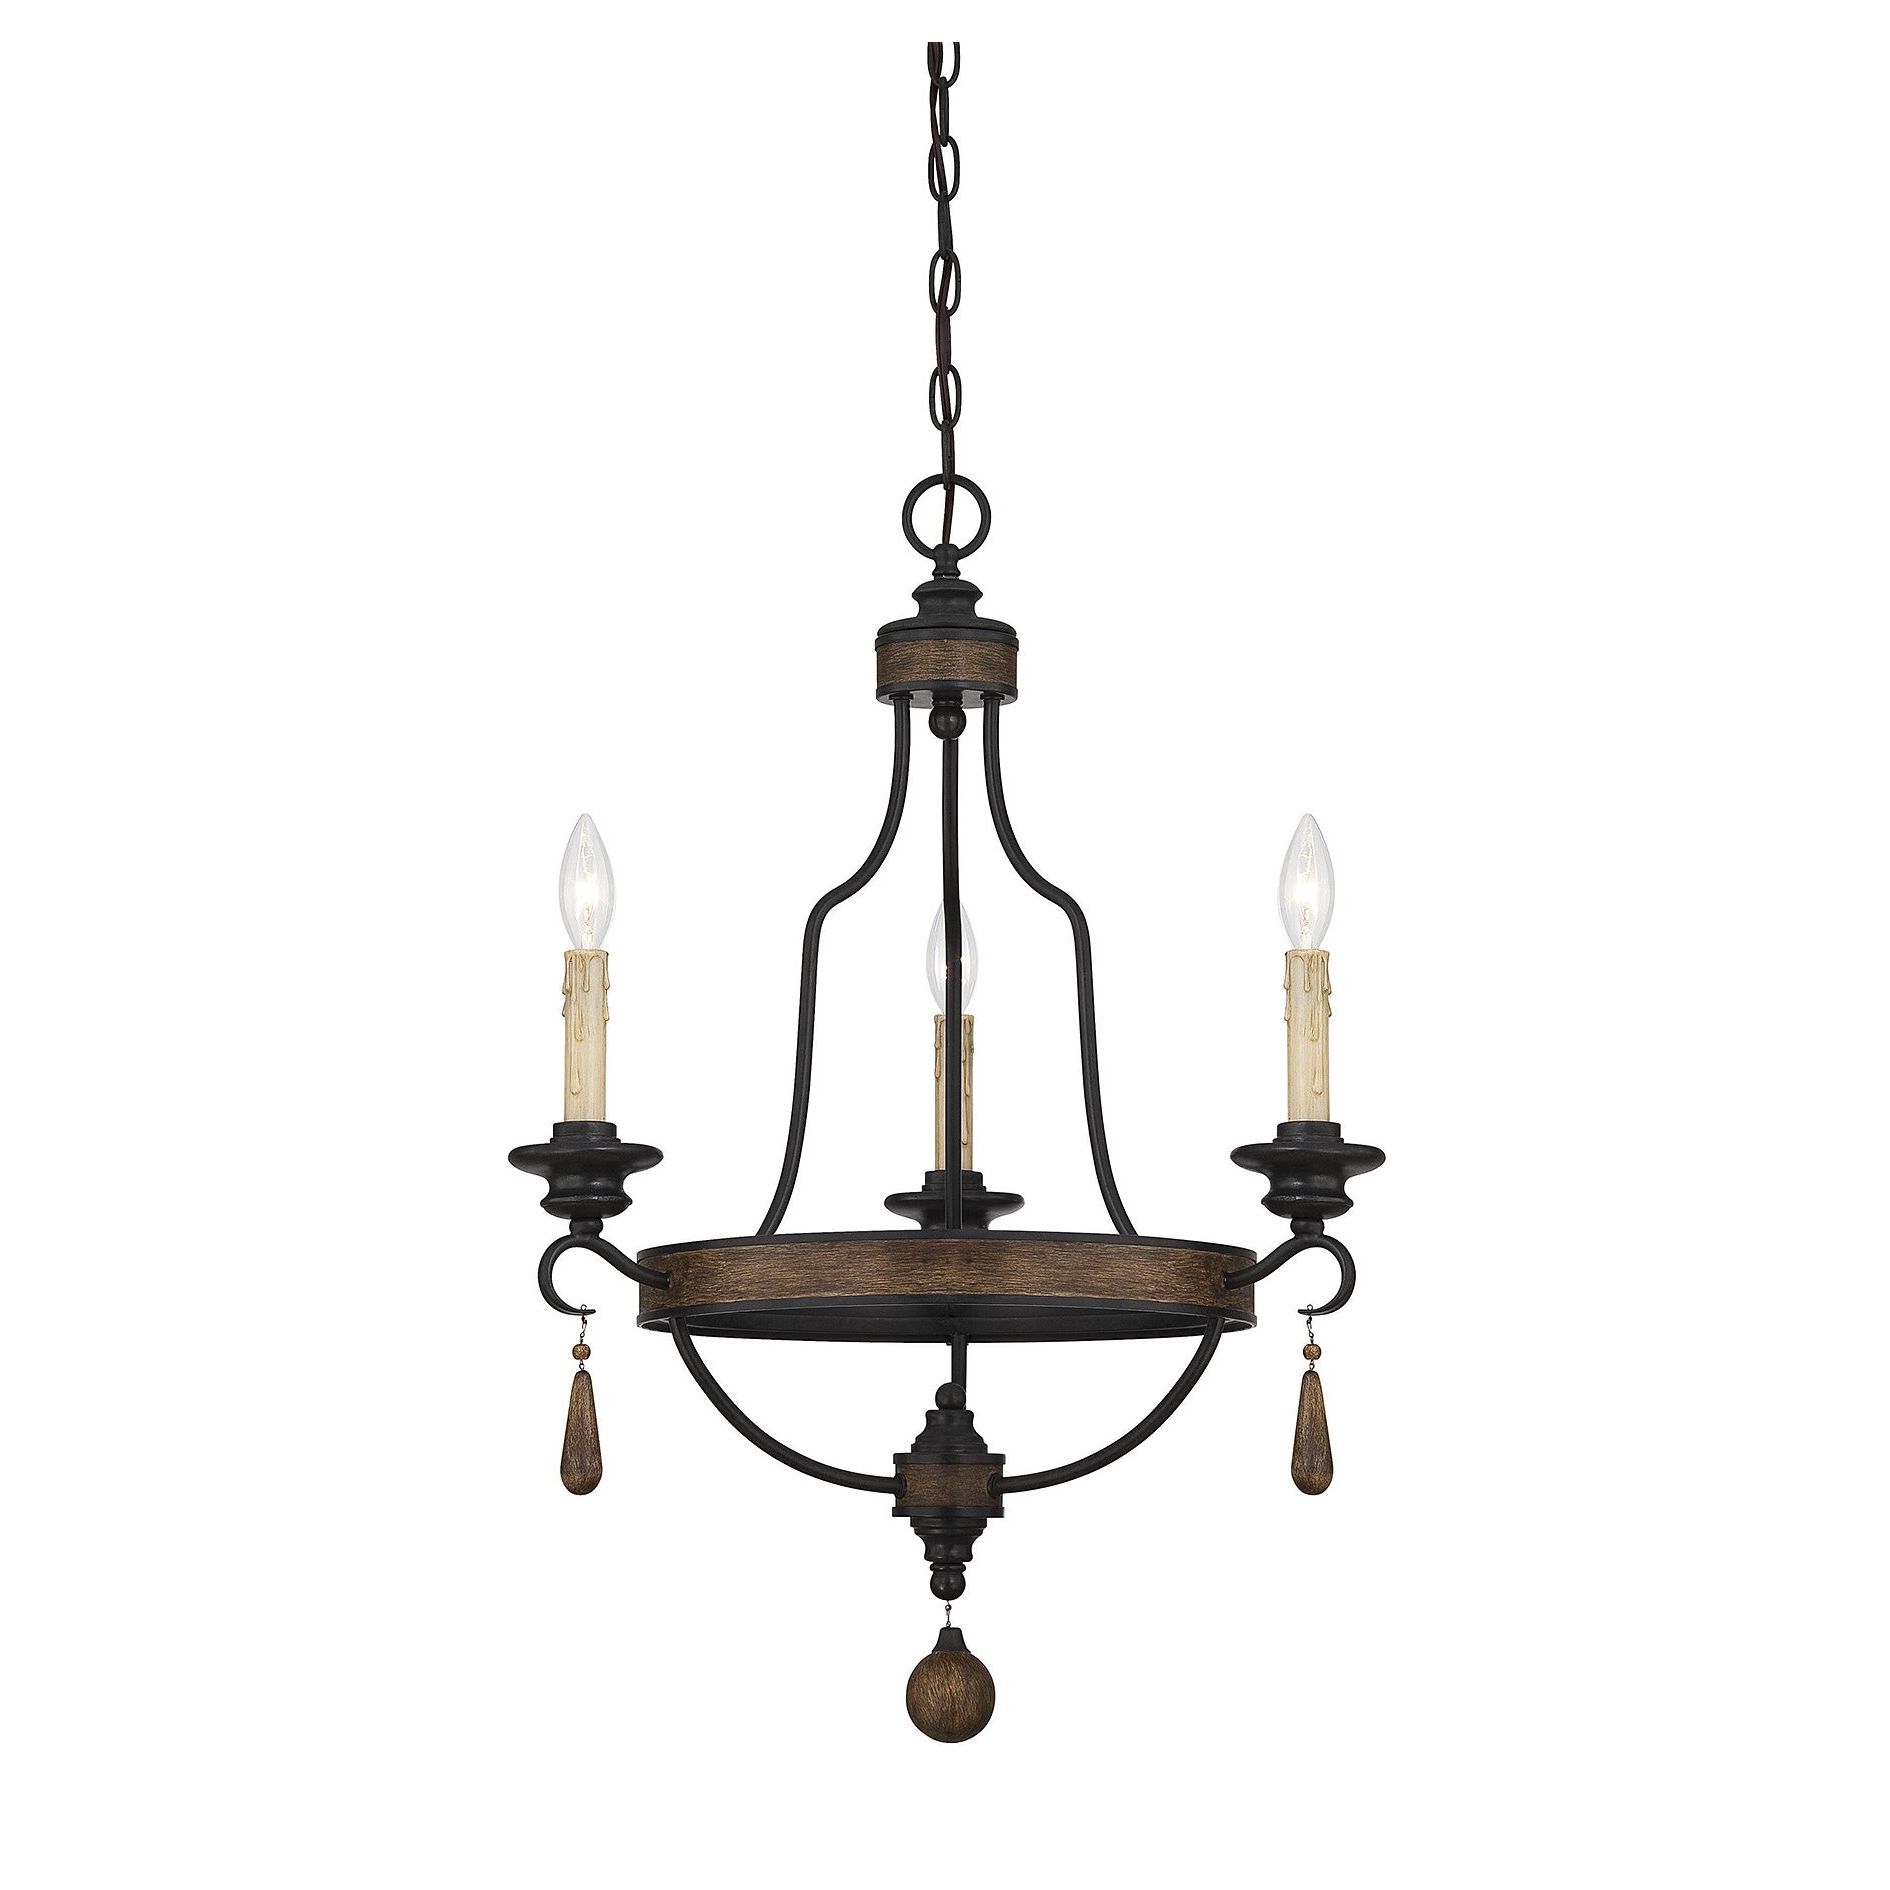 3 Light Pendant Chandeliers With Newest Savoy House Kelsey 3 Light Candle Chandelier & Reviews (View 7 of 20)